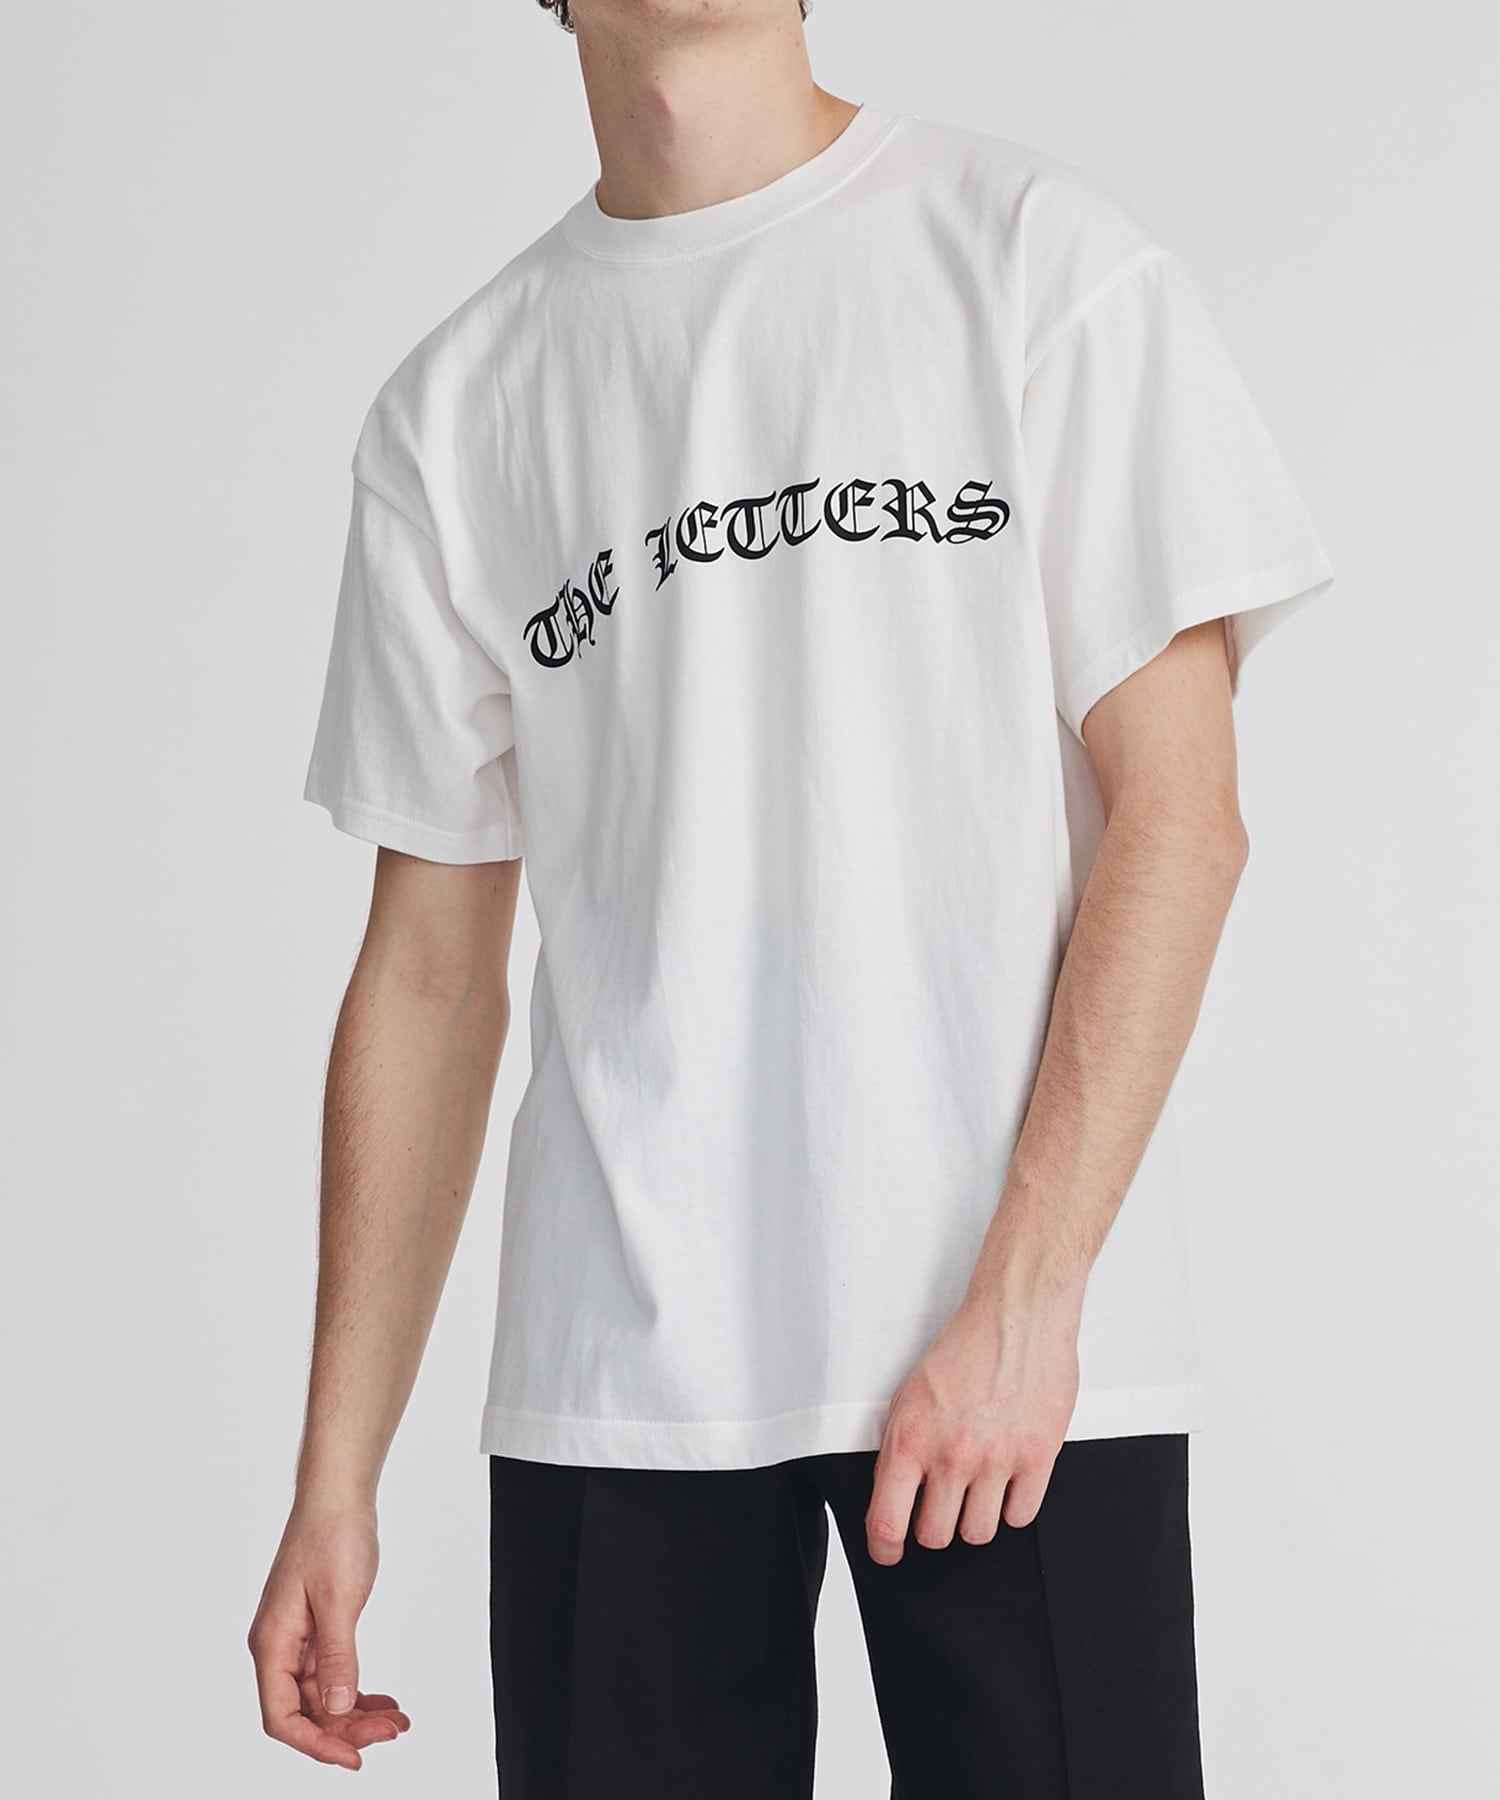 THE LETTERS T-SHIRT